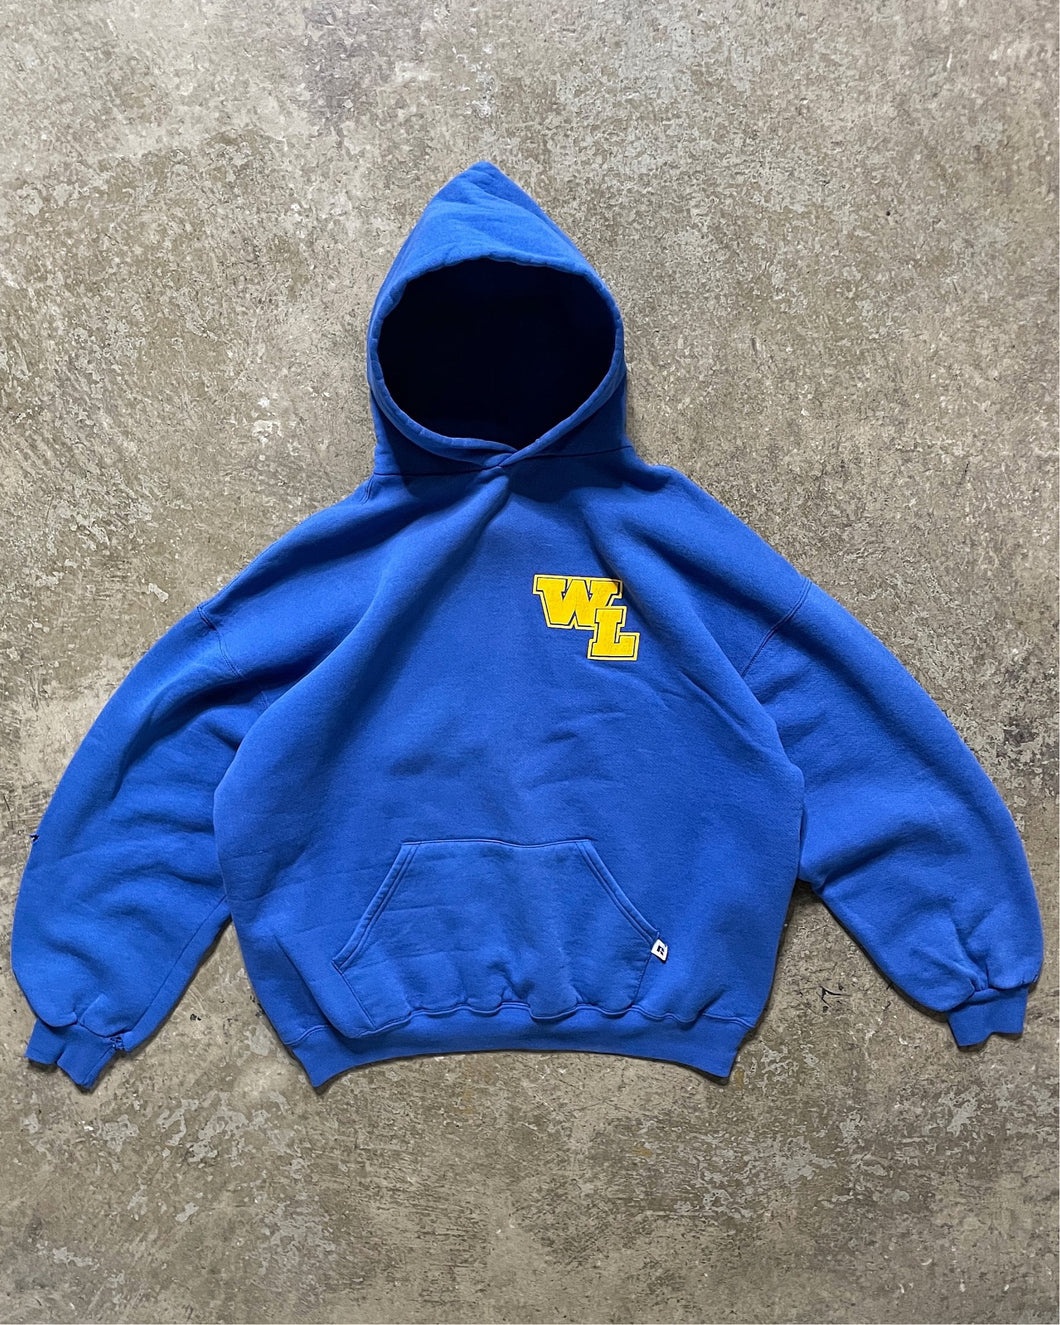 FADED BLUE “ W L “ RUSSELL HOODIE - 1990S